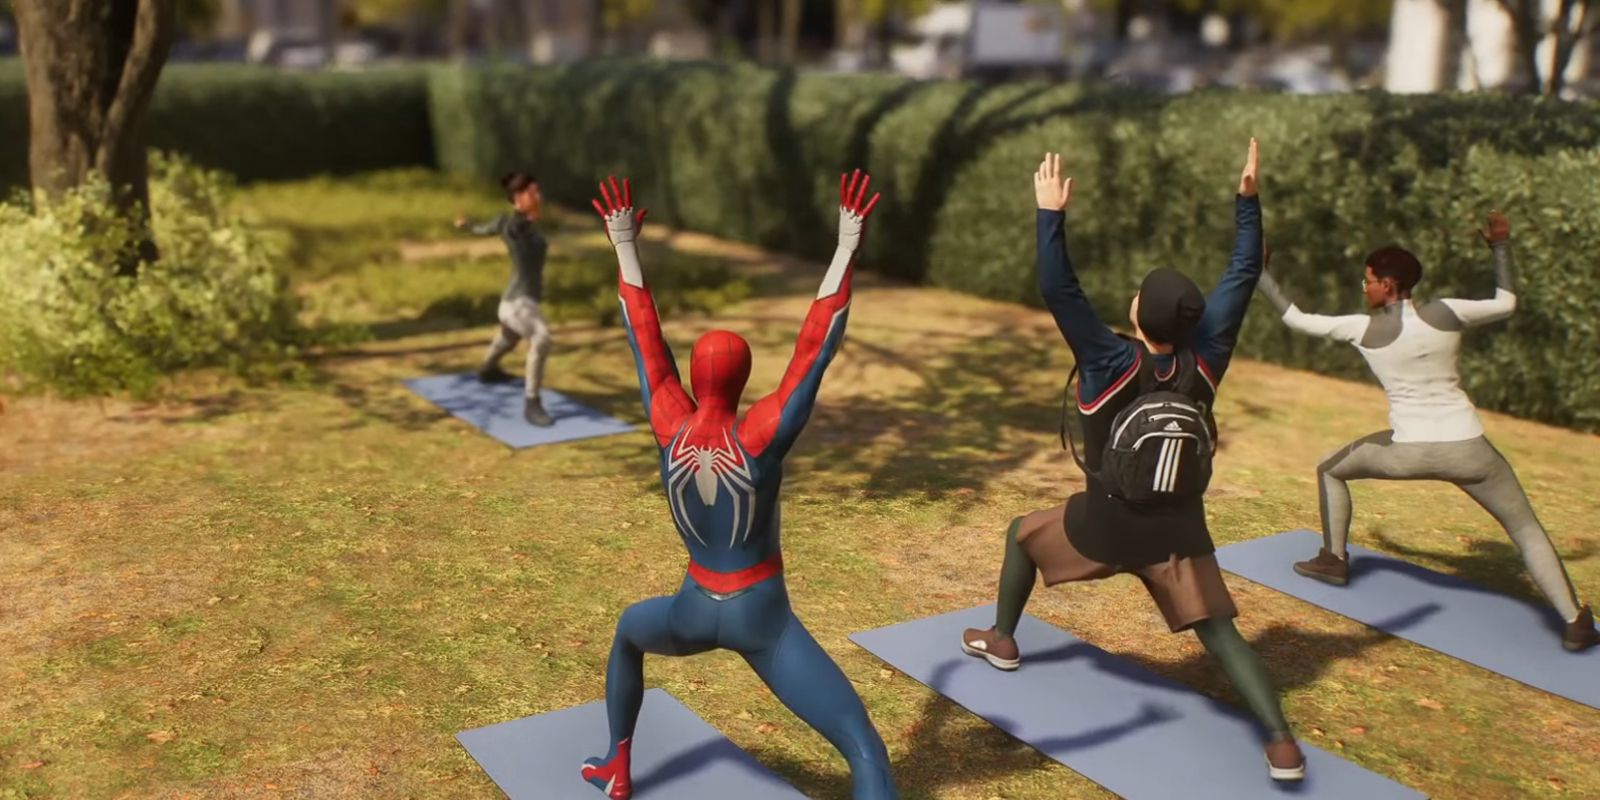 Spider-Man doing yoga poses in a park with three NPCs.